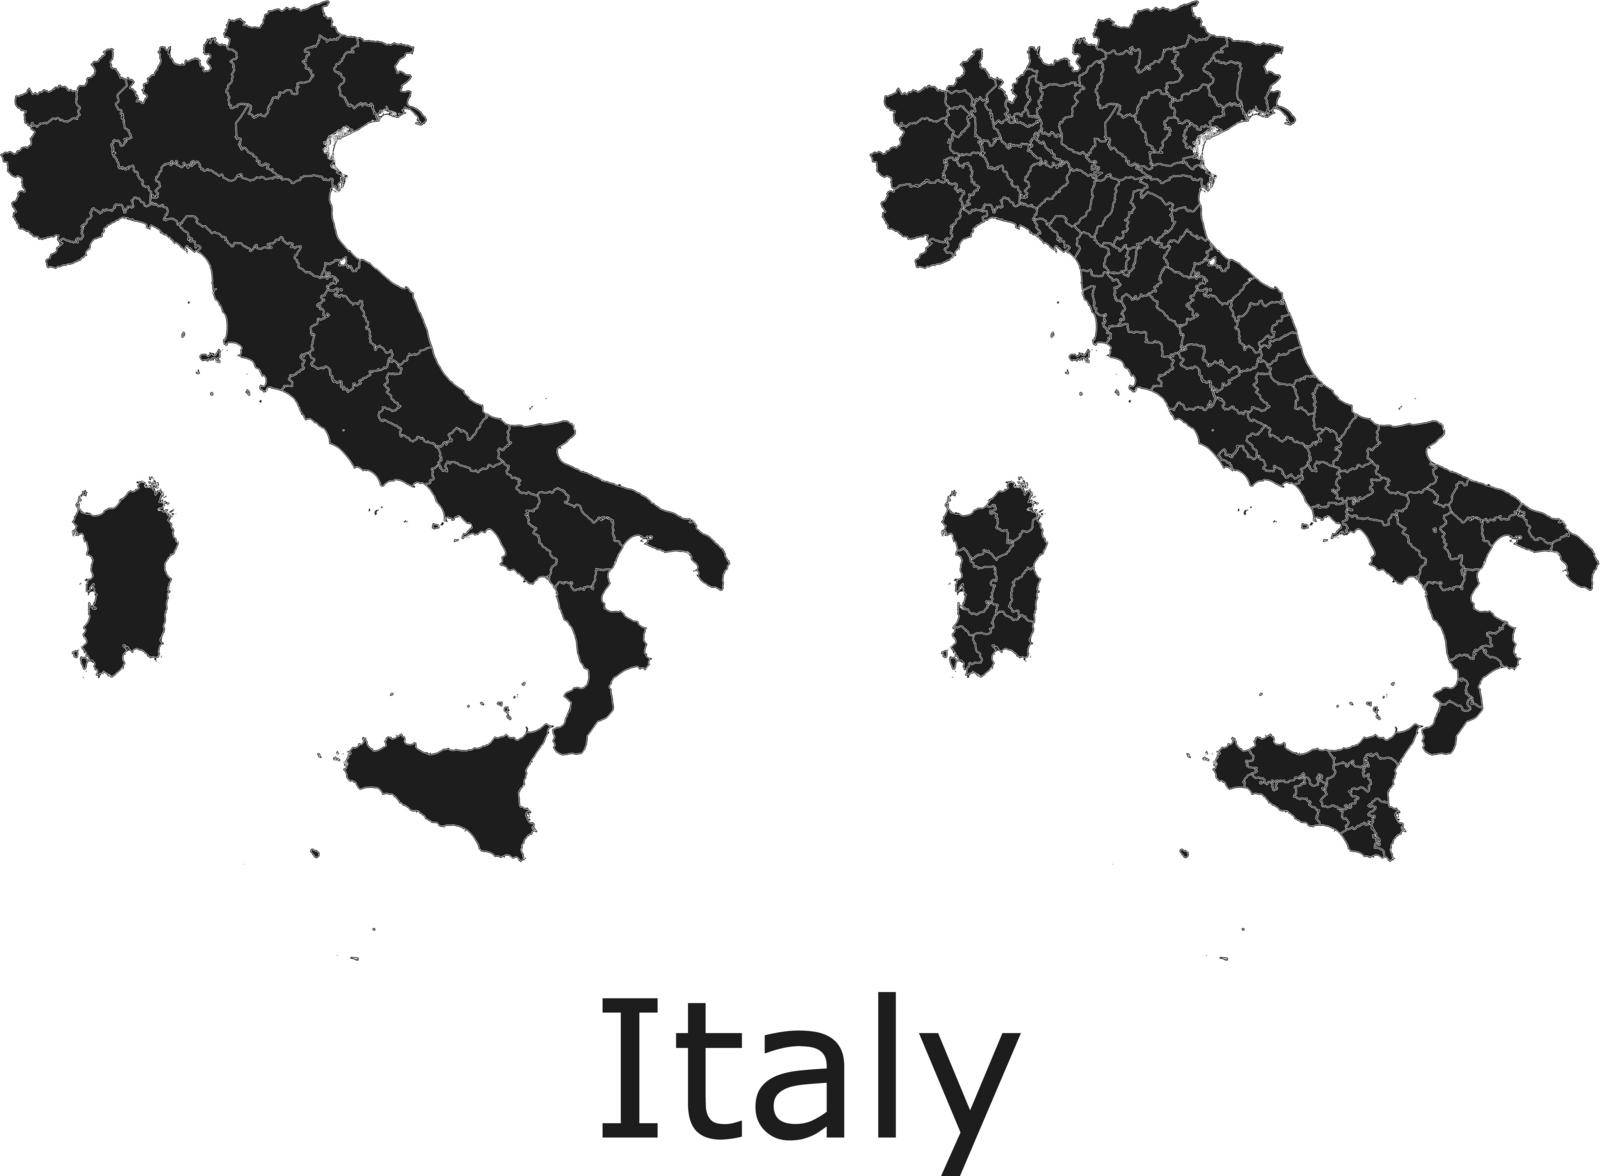 Italy vector maps with administrative regions, municipalities, departments, borders